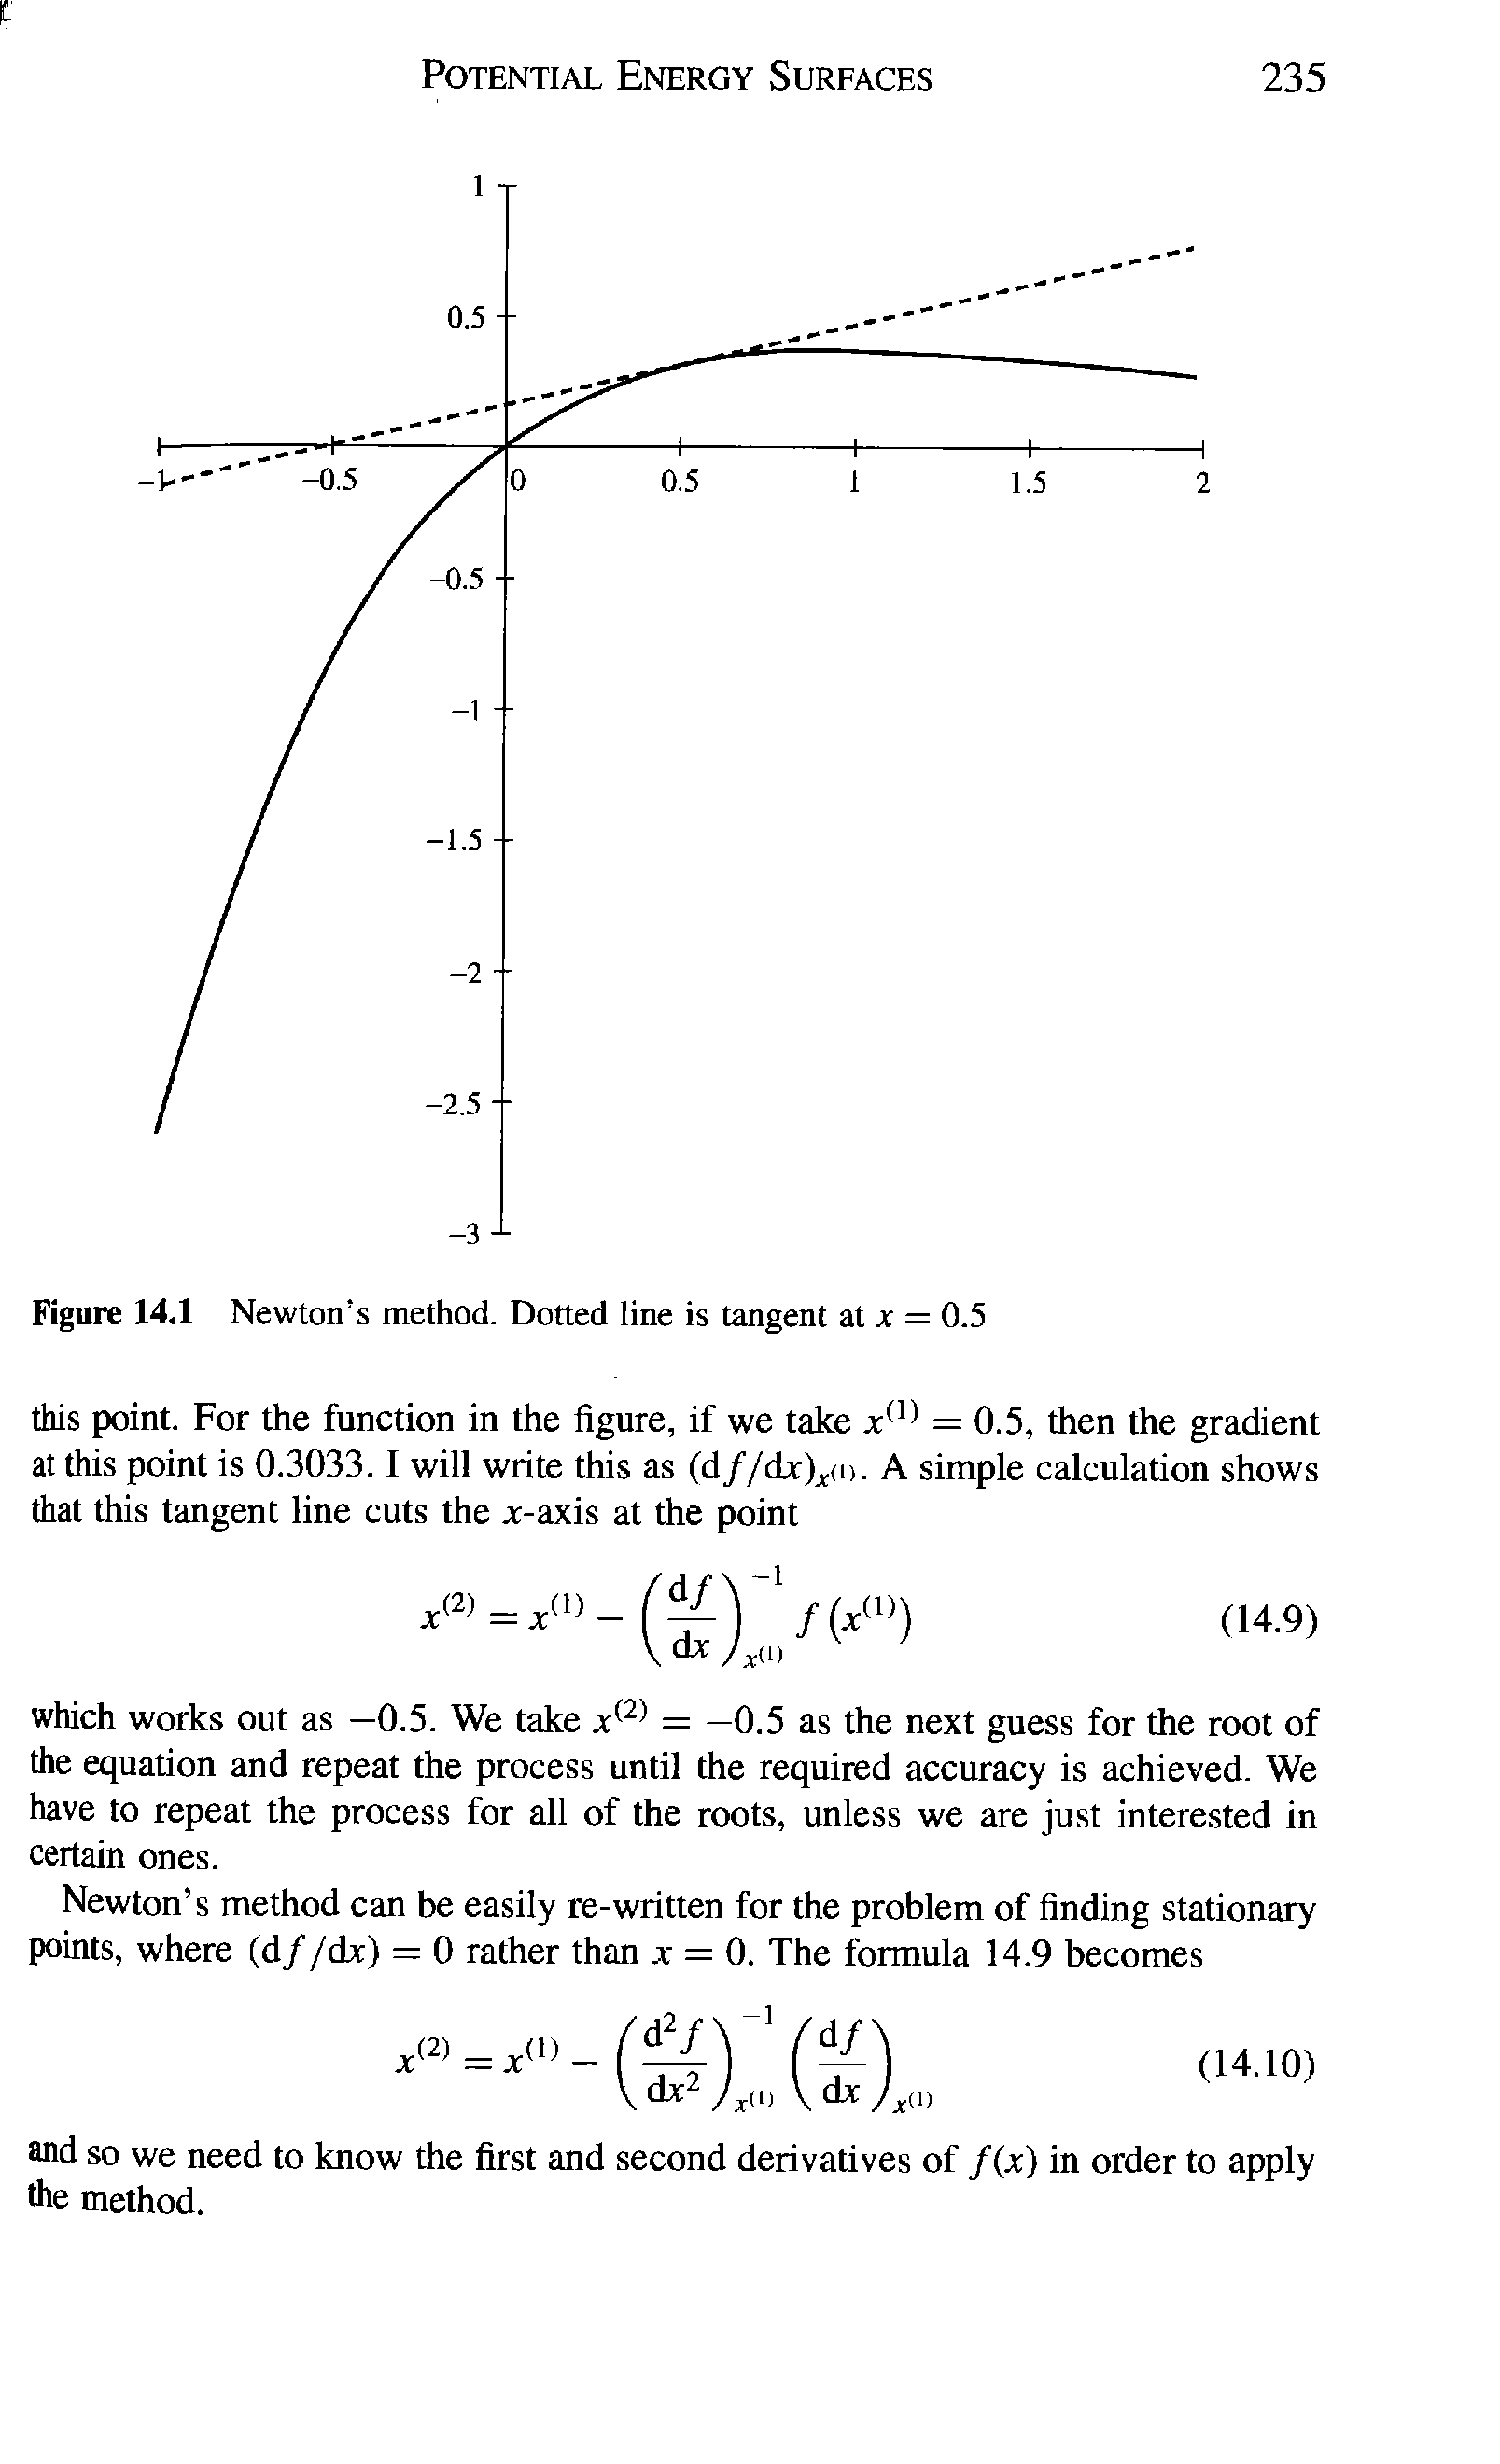 Figure 14.1 Newton s method. Dotted line is tangent at j = 0.5...